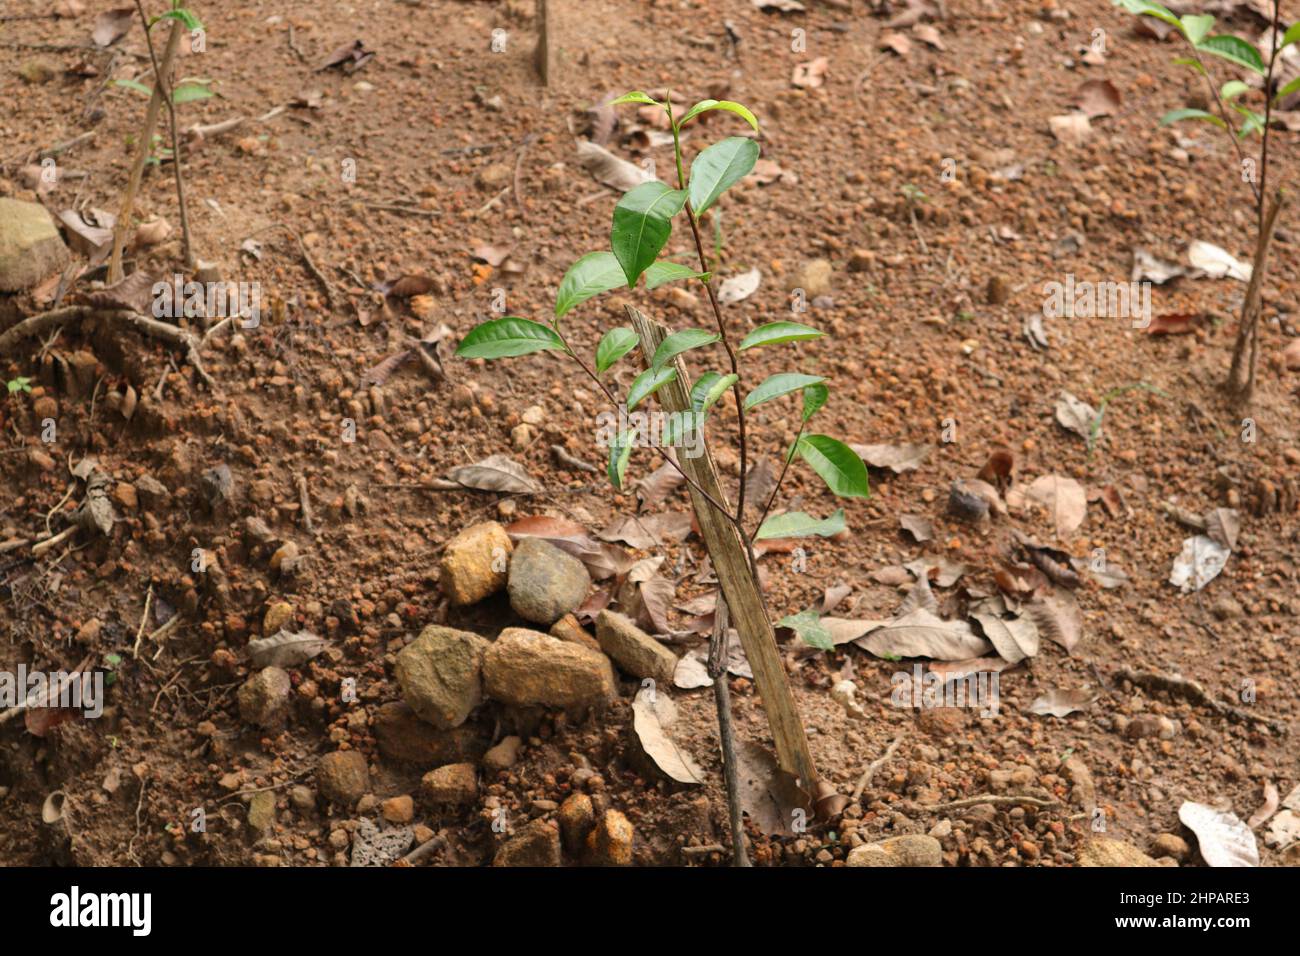 Newly planted young tea plant with supporting stem in a Sri Lankan low country tea plantation Stock Photo